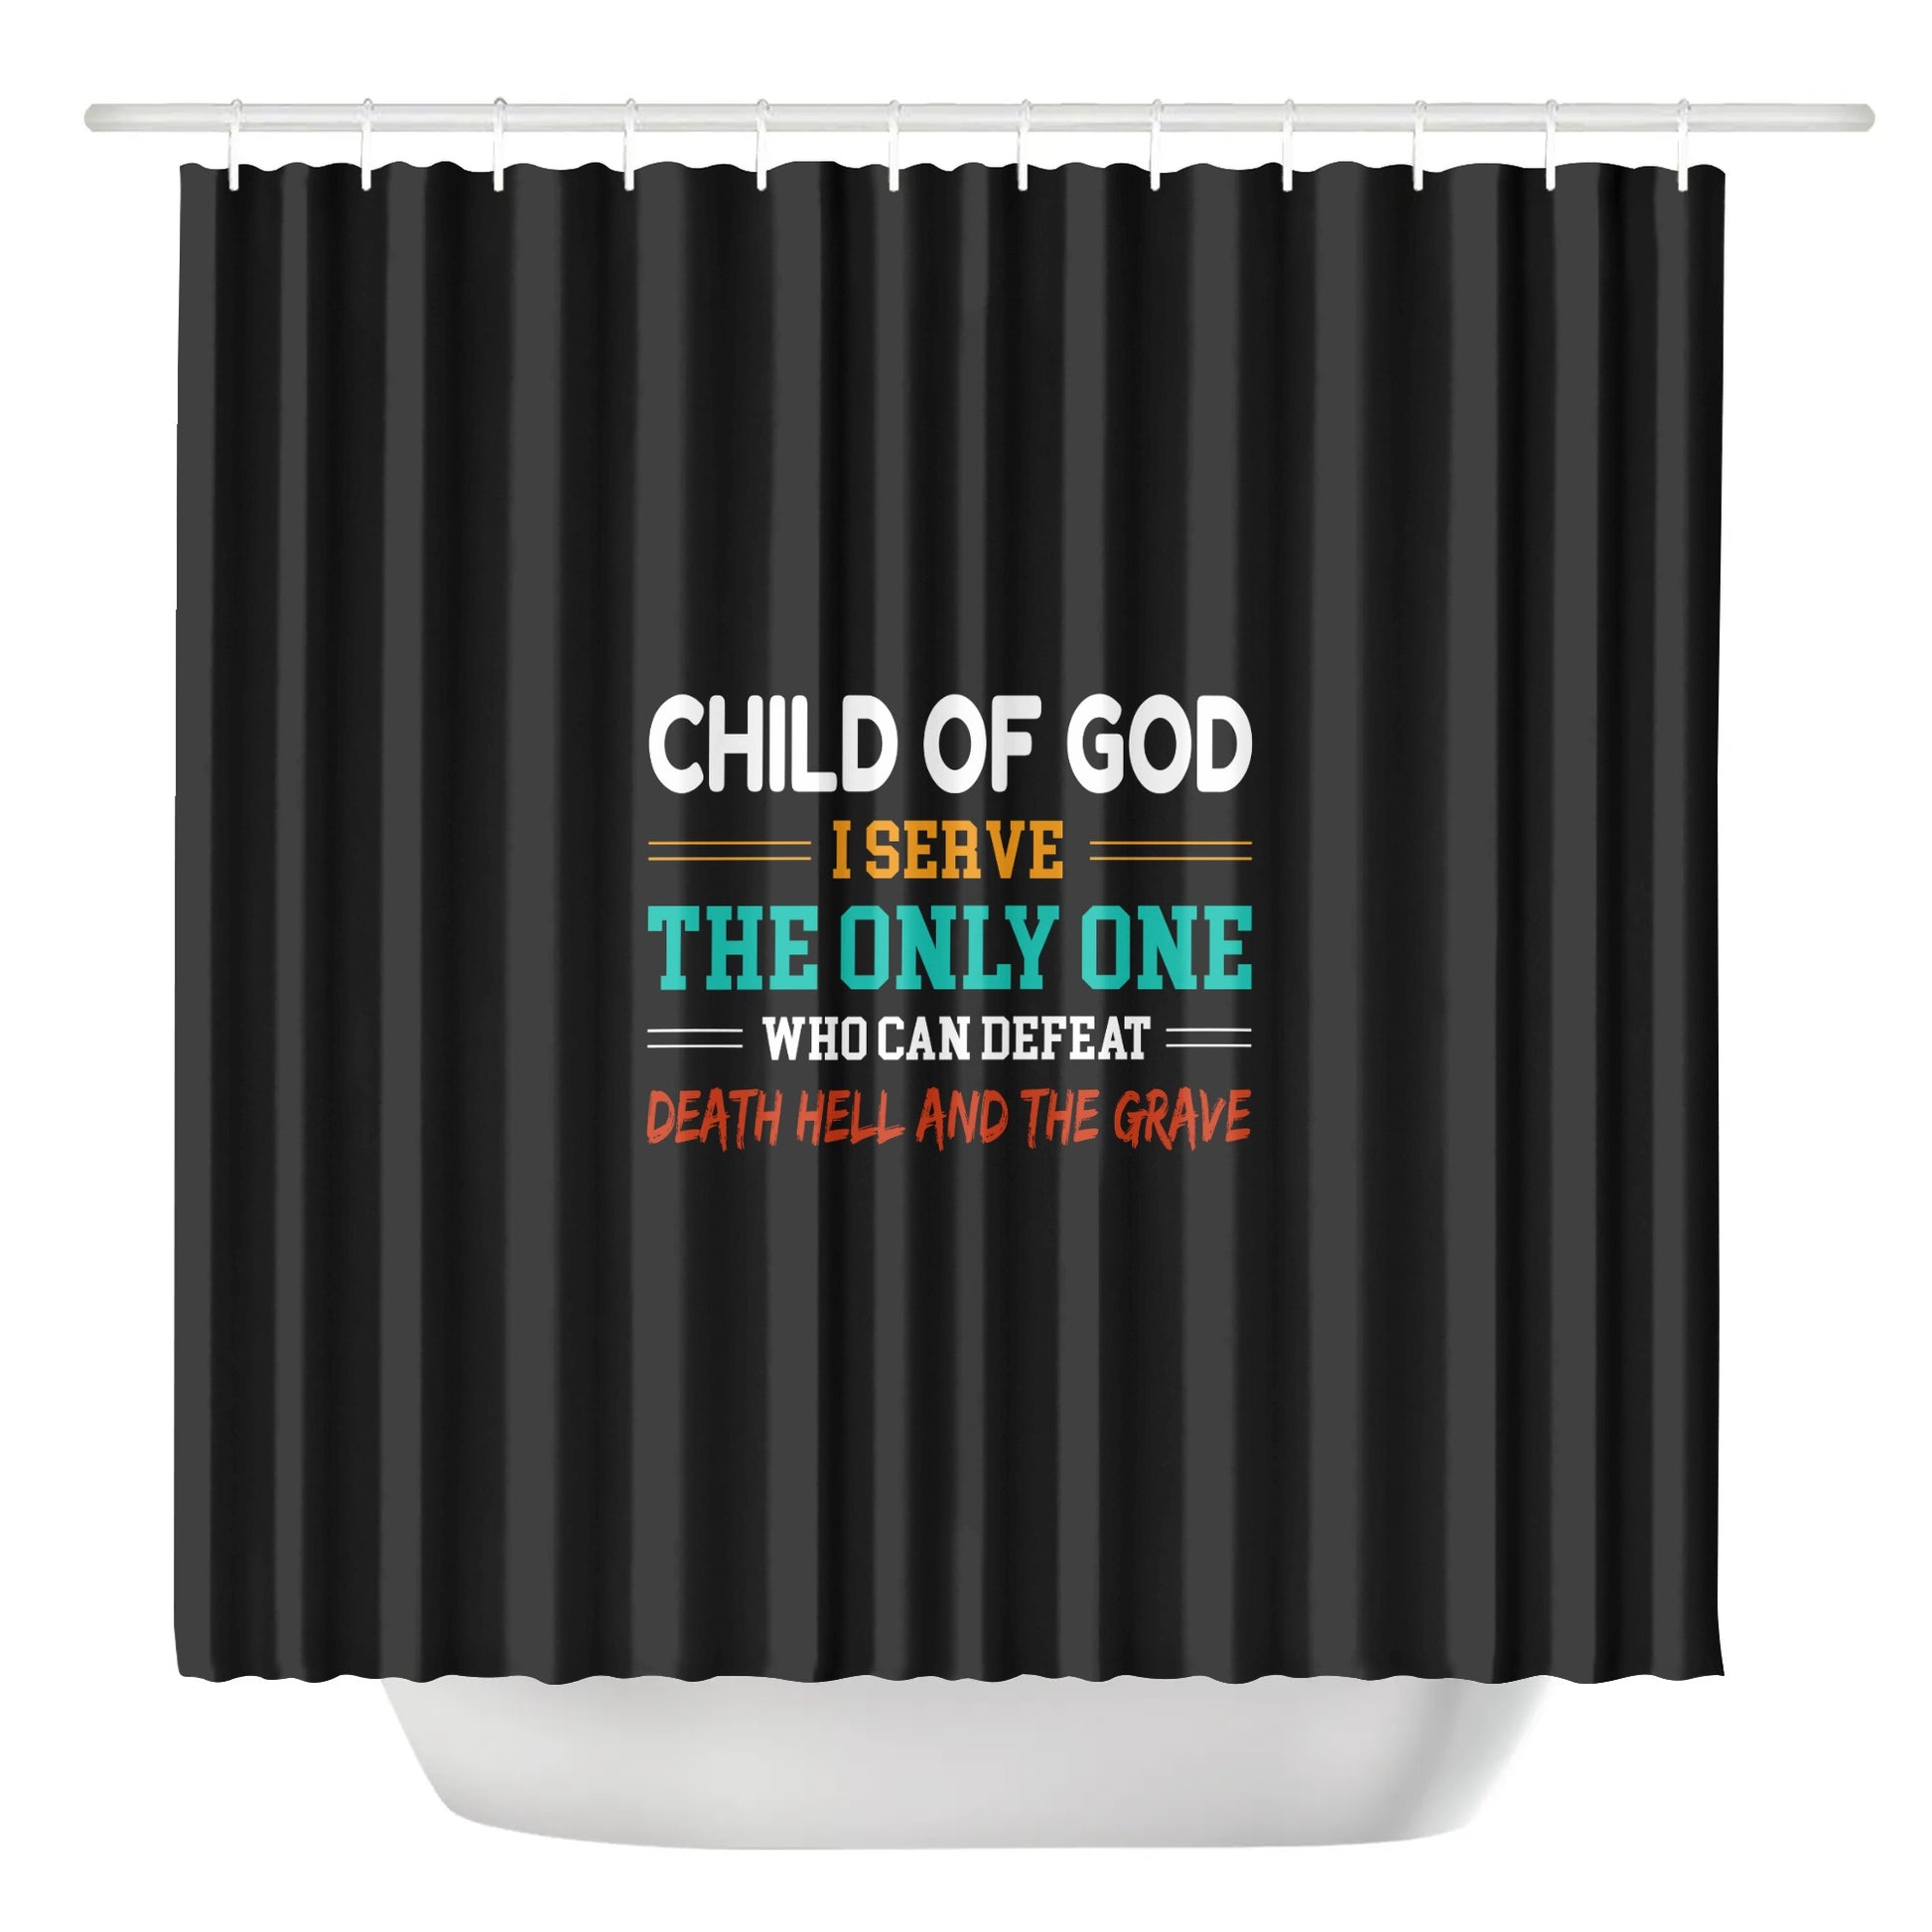 Child Of God I Serve The Only One Who Can Defeat Death Hell And The Grave Christian Shower Curtain popcustoms